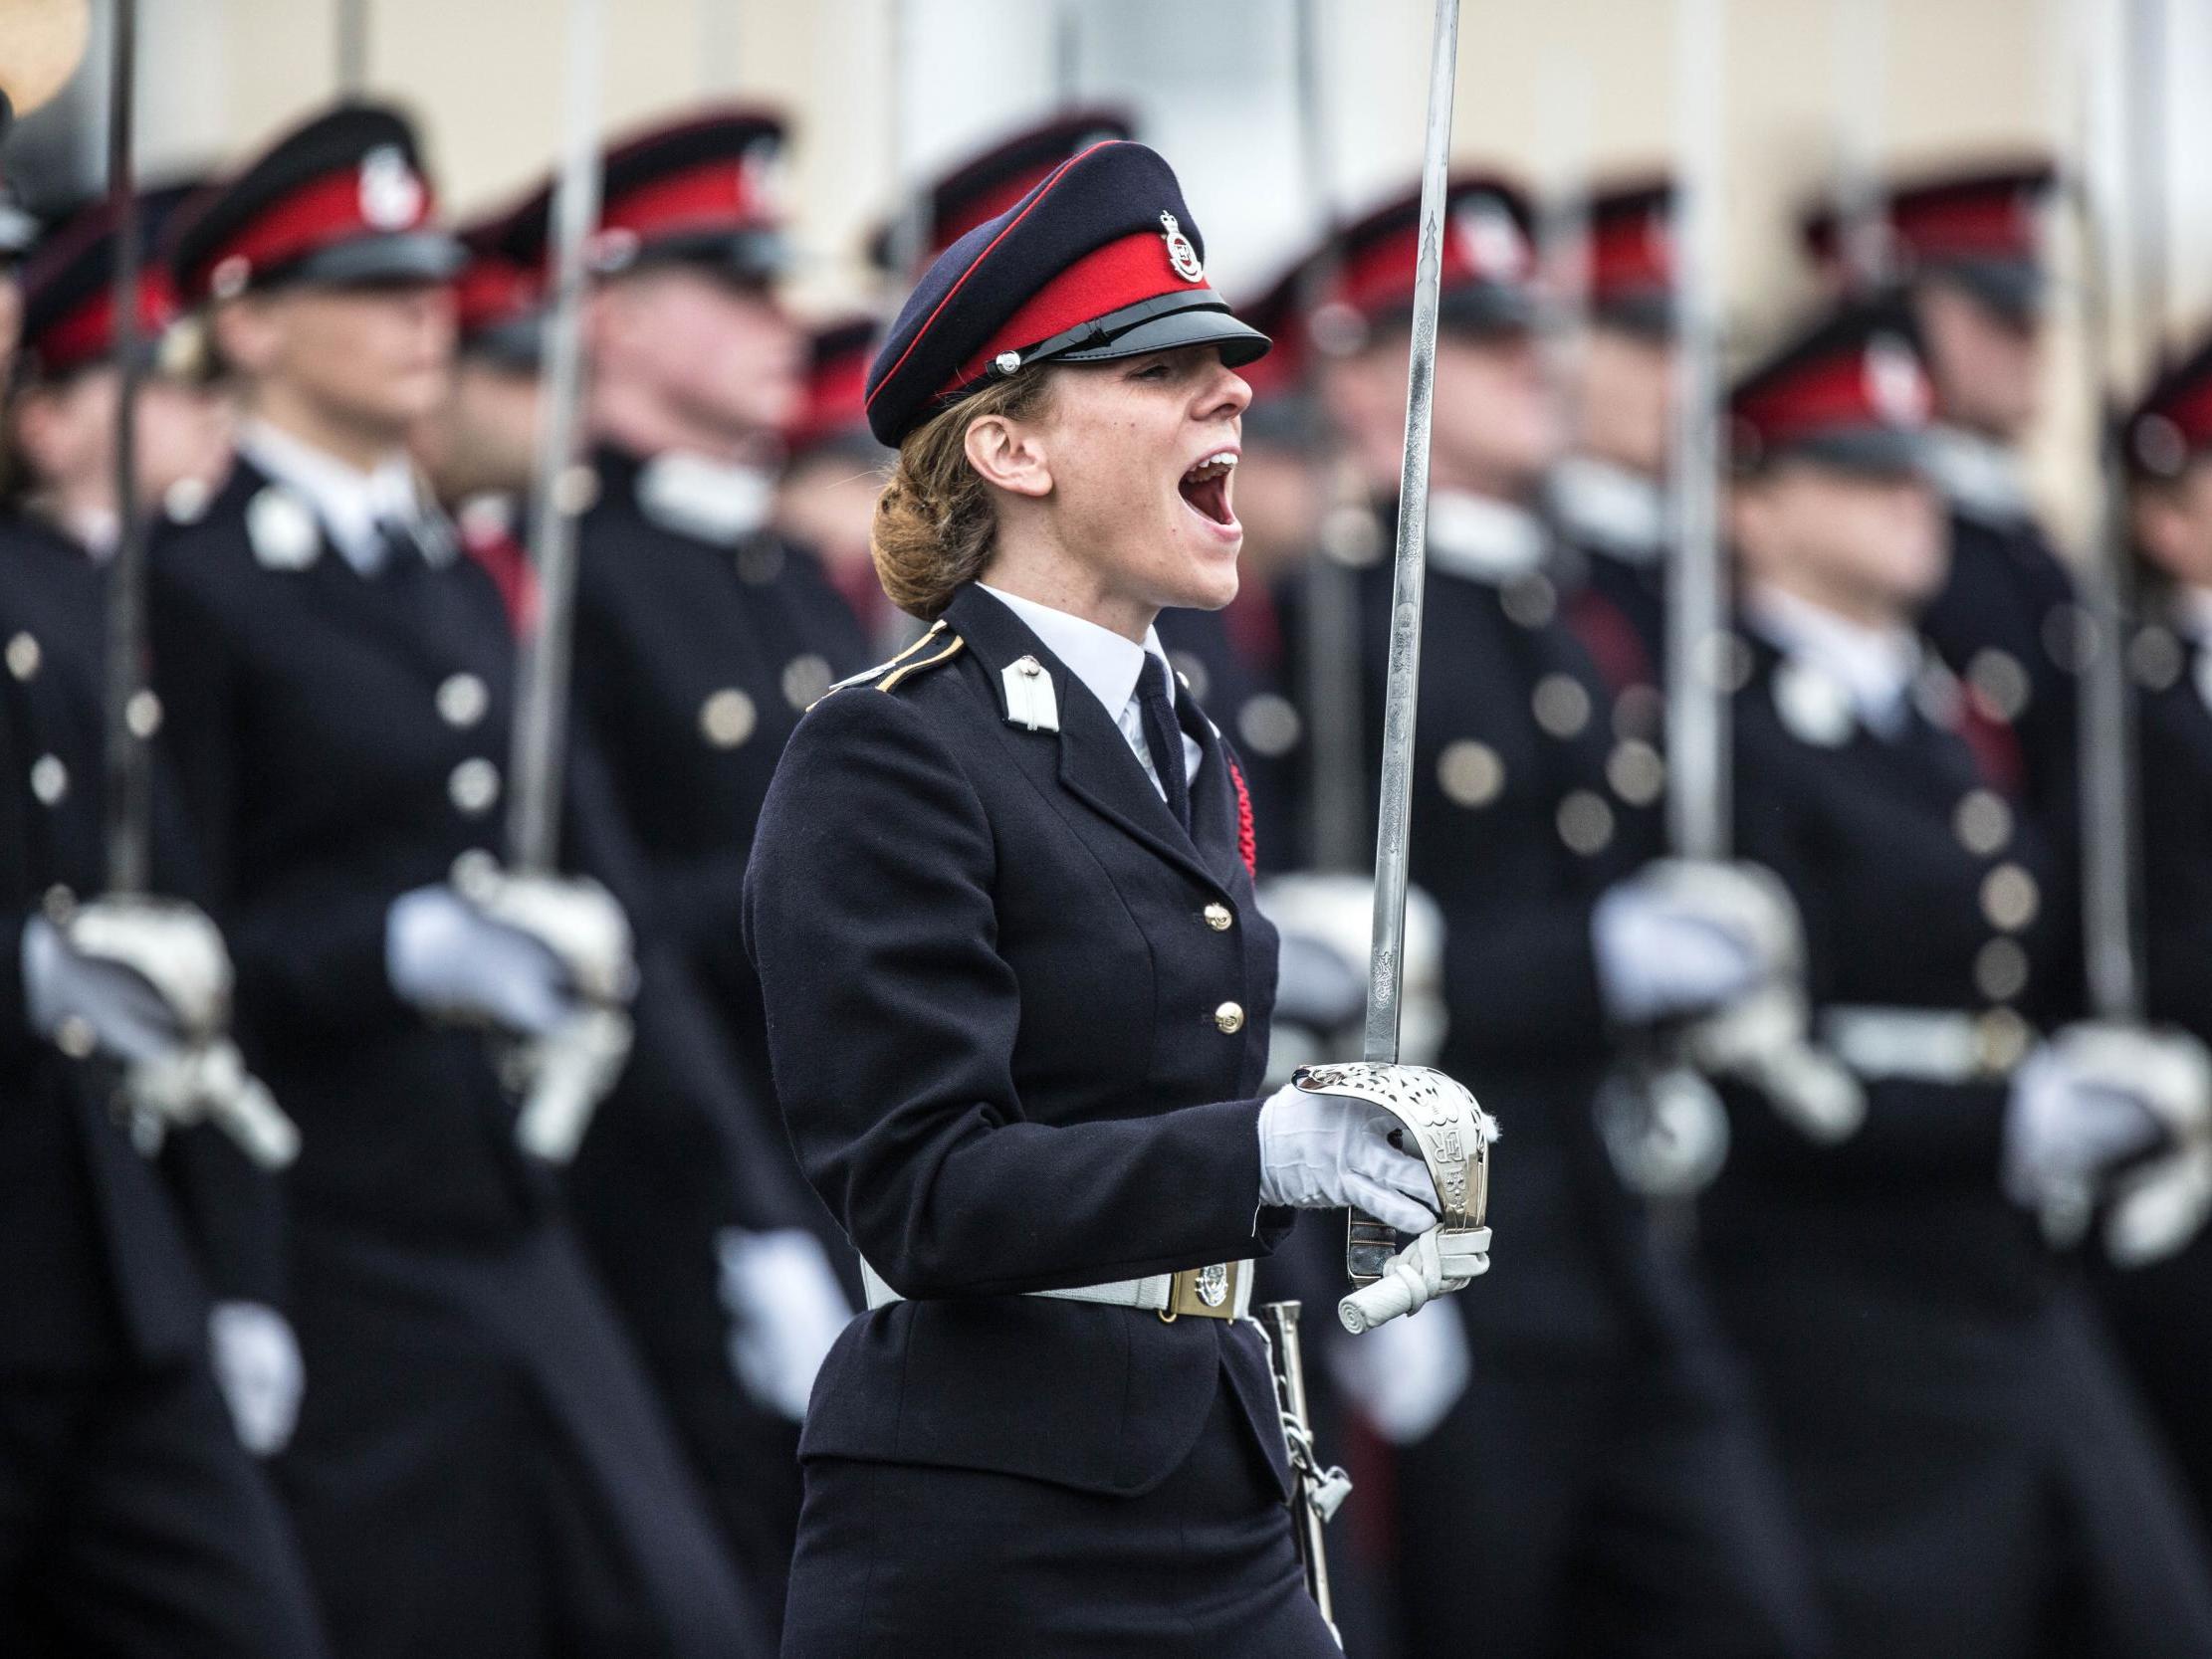 British Army officer Captain Rosie Wild shouts commands during the Officer Cadets march at Sandhurst after receiving the Sword of Honour, 16 December, 2016.